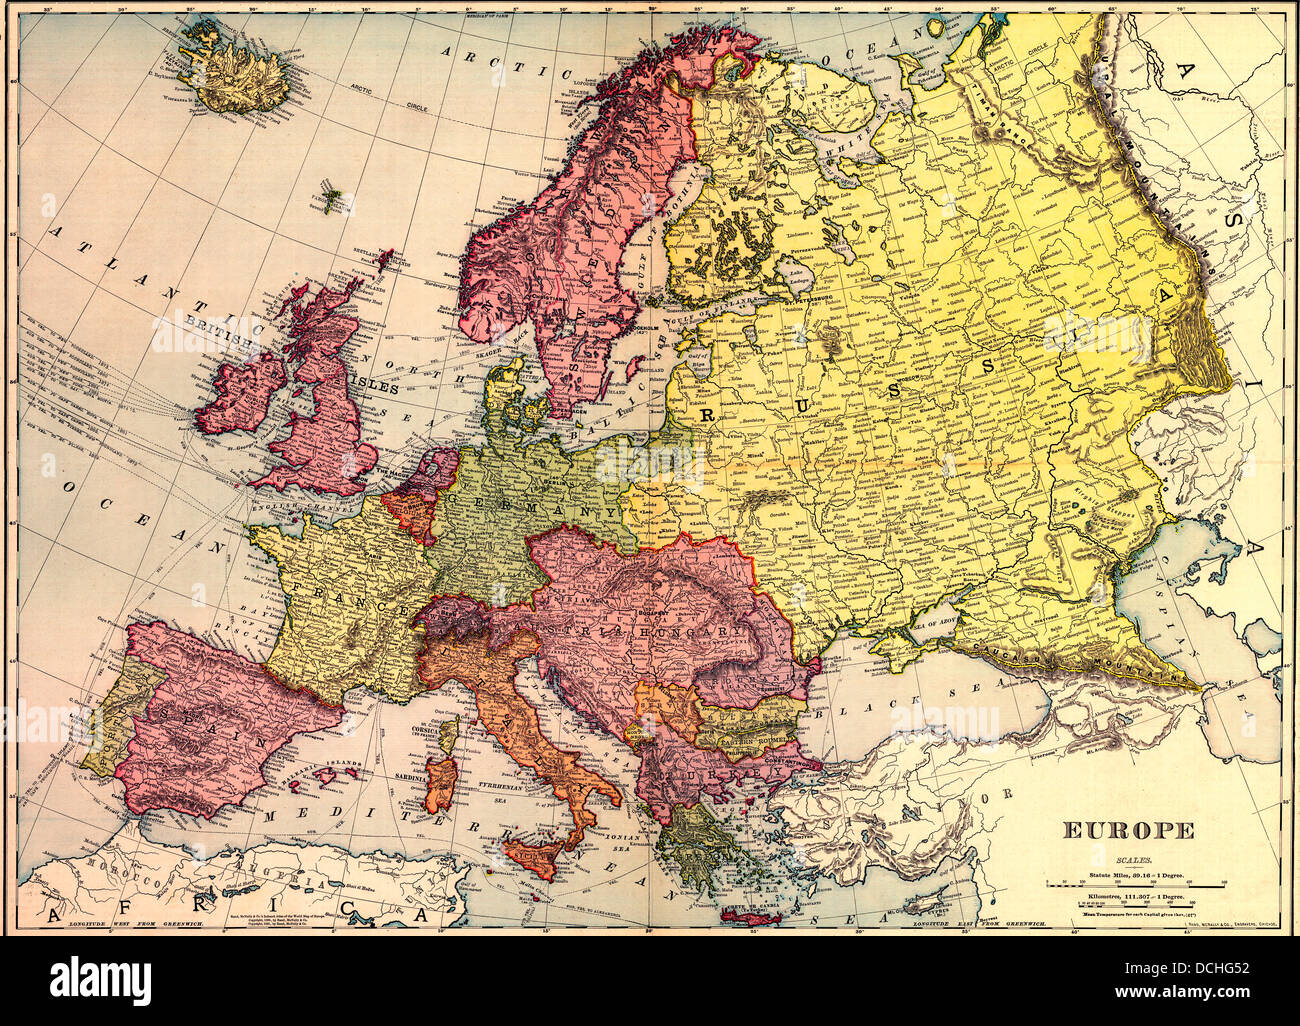 Map of Europe 1898 Stock Photo